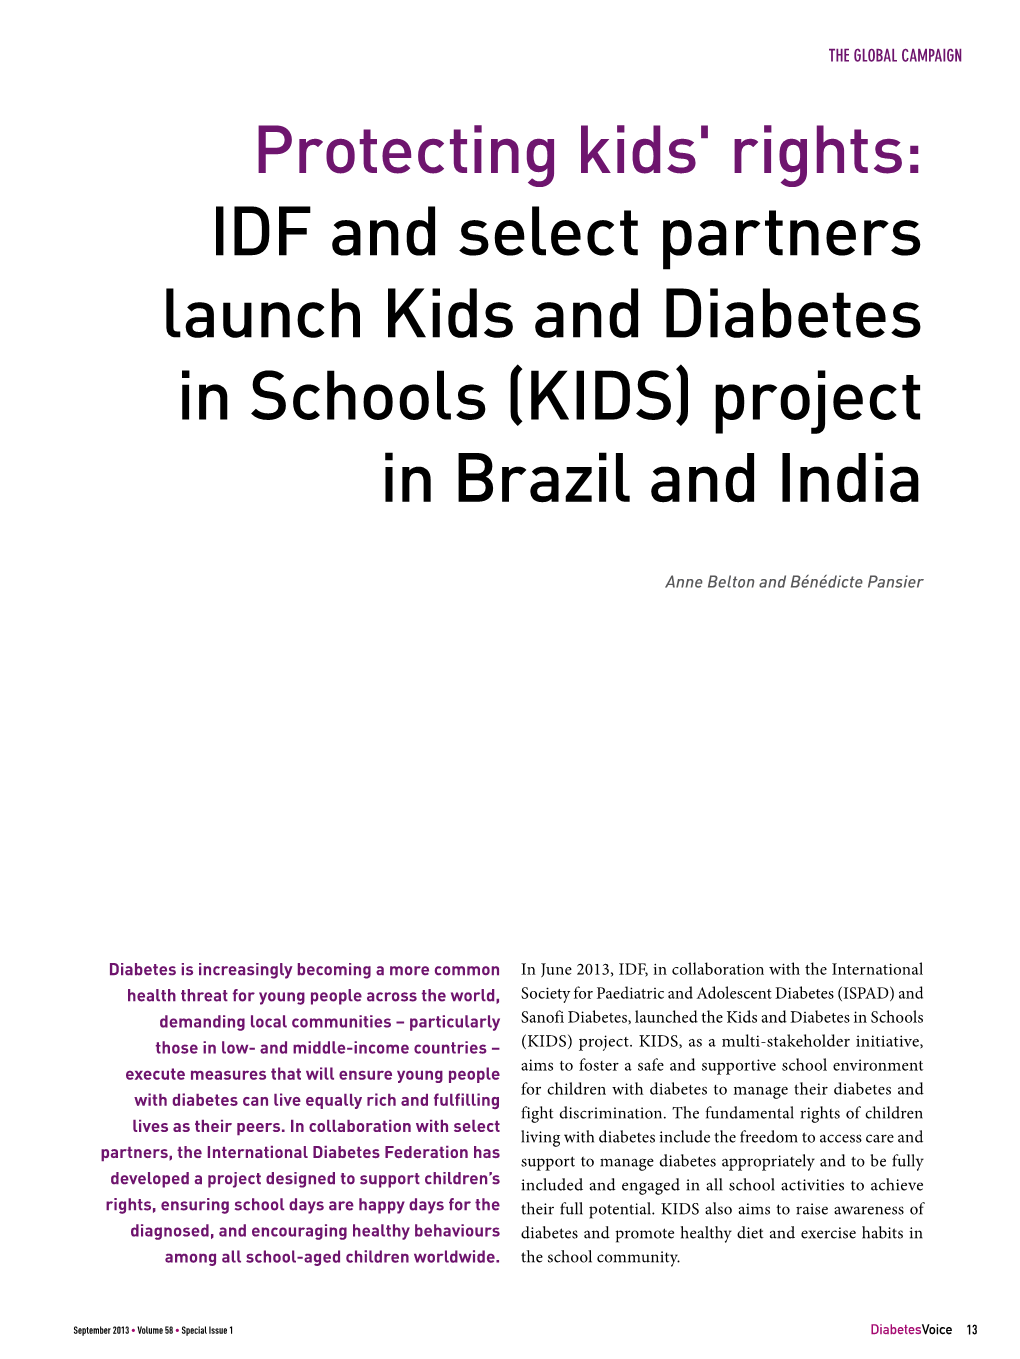 IDF and Select Partners Launch Kids and Diabetes in Schools (KIDS) Project in Brazil and India